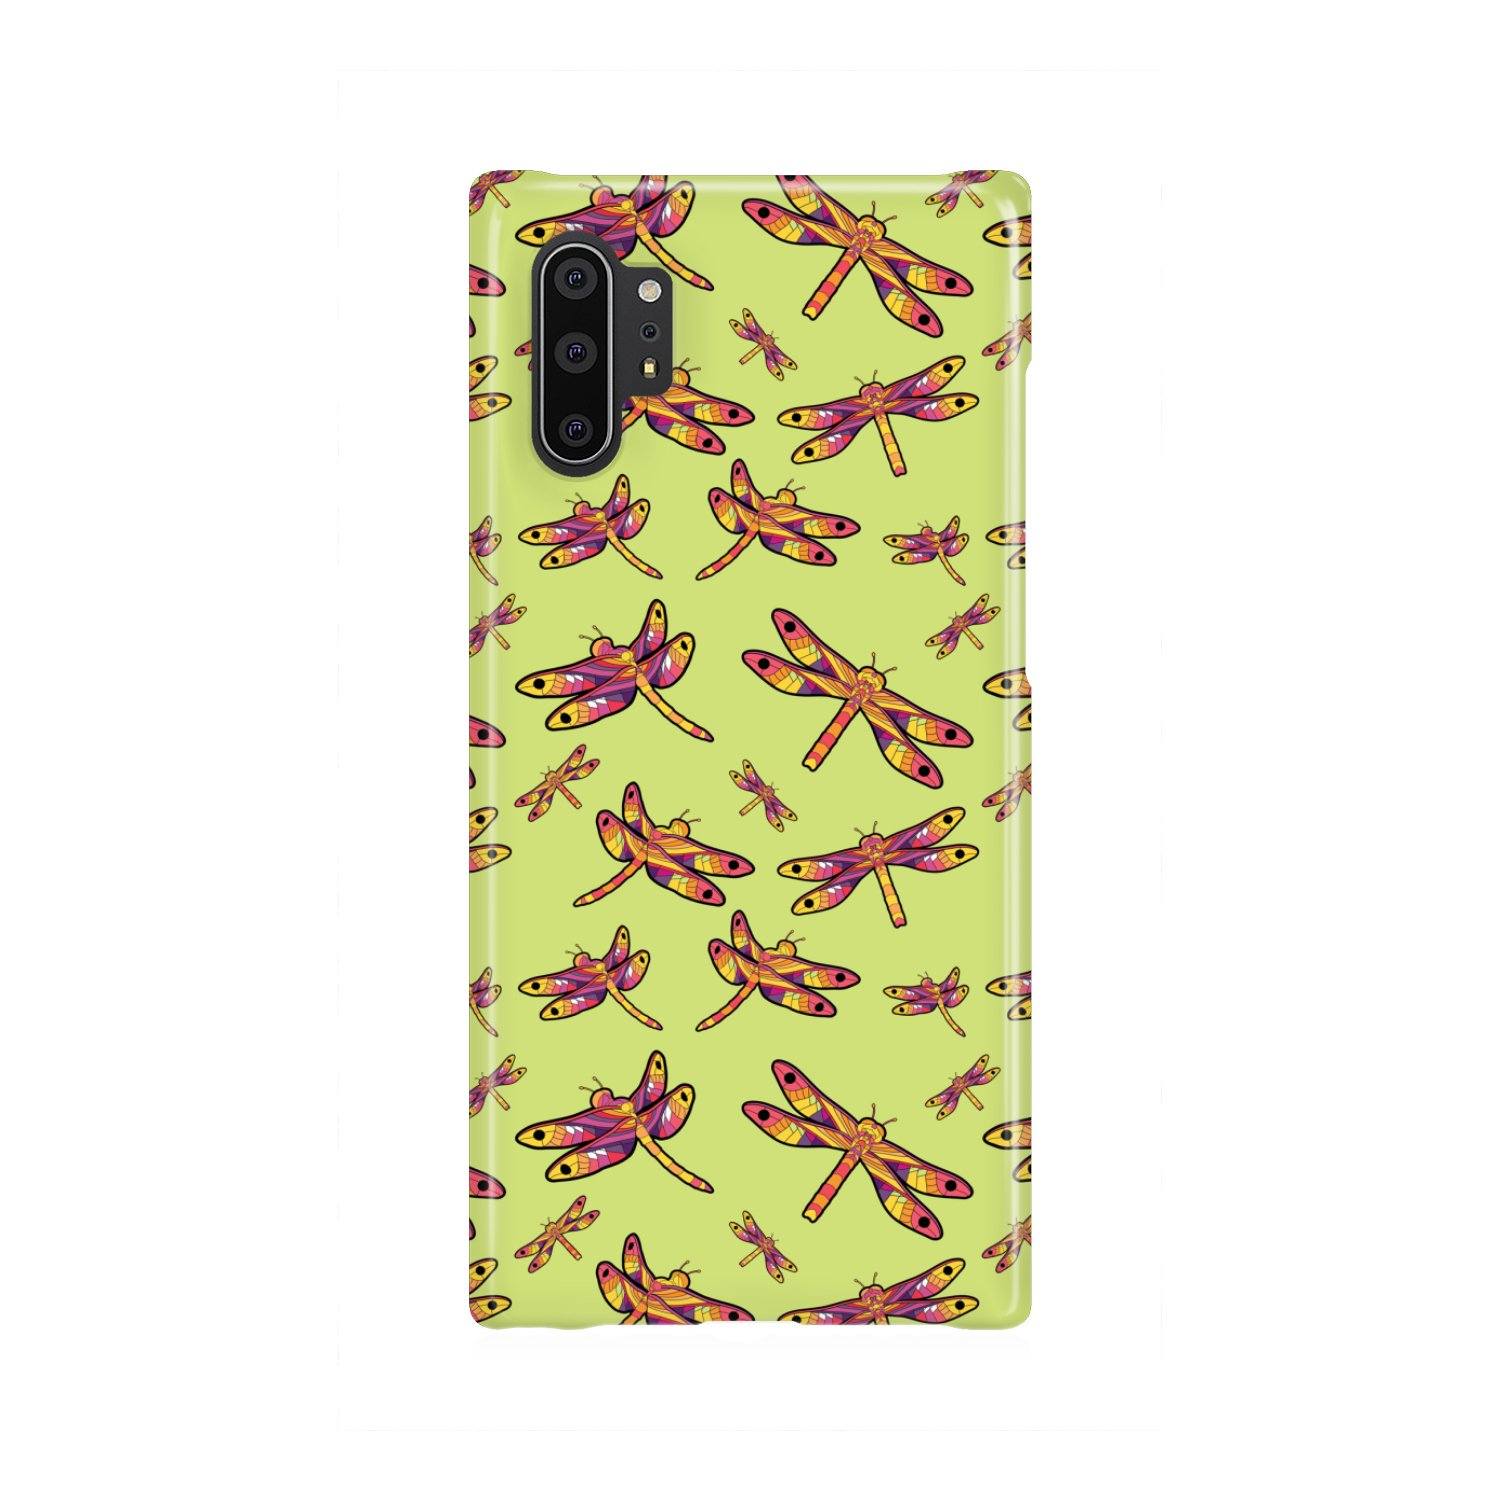 Gathering Lime Phone Case Phone Case wc-fulfillment Samsung Galaxy Note 10 Plus 